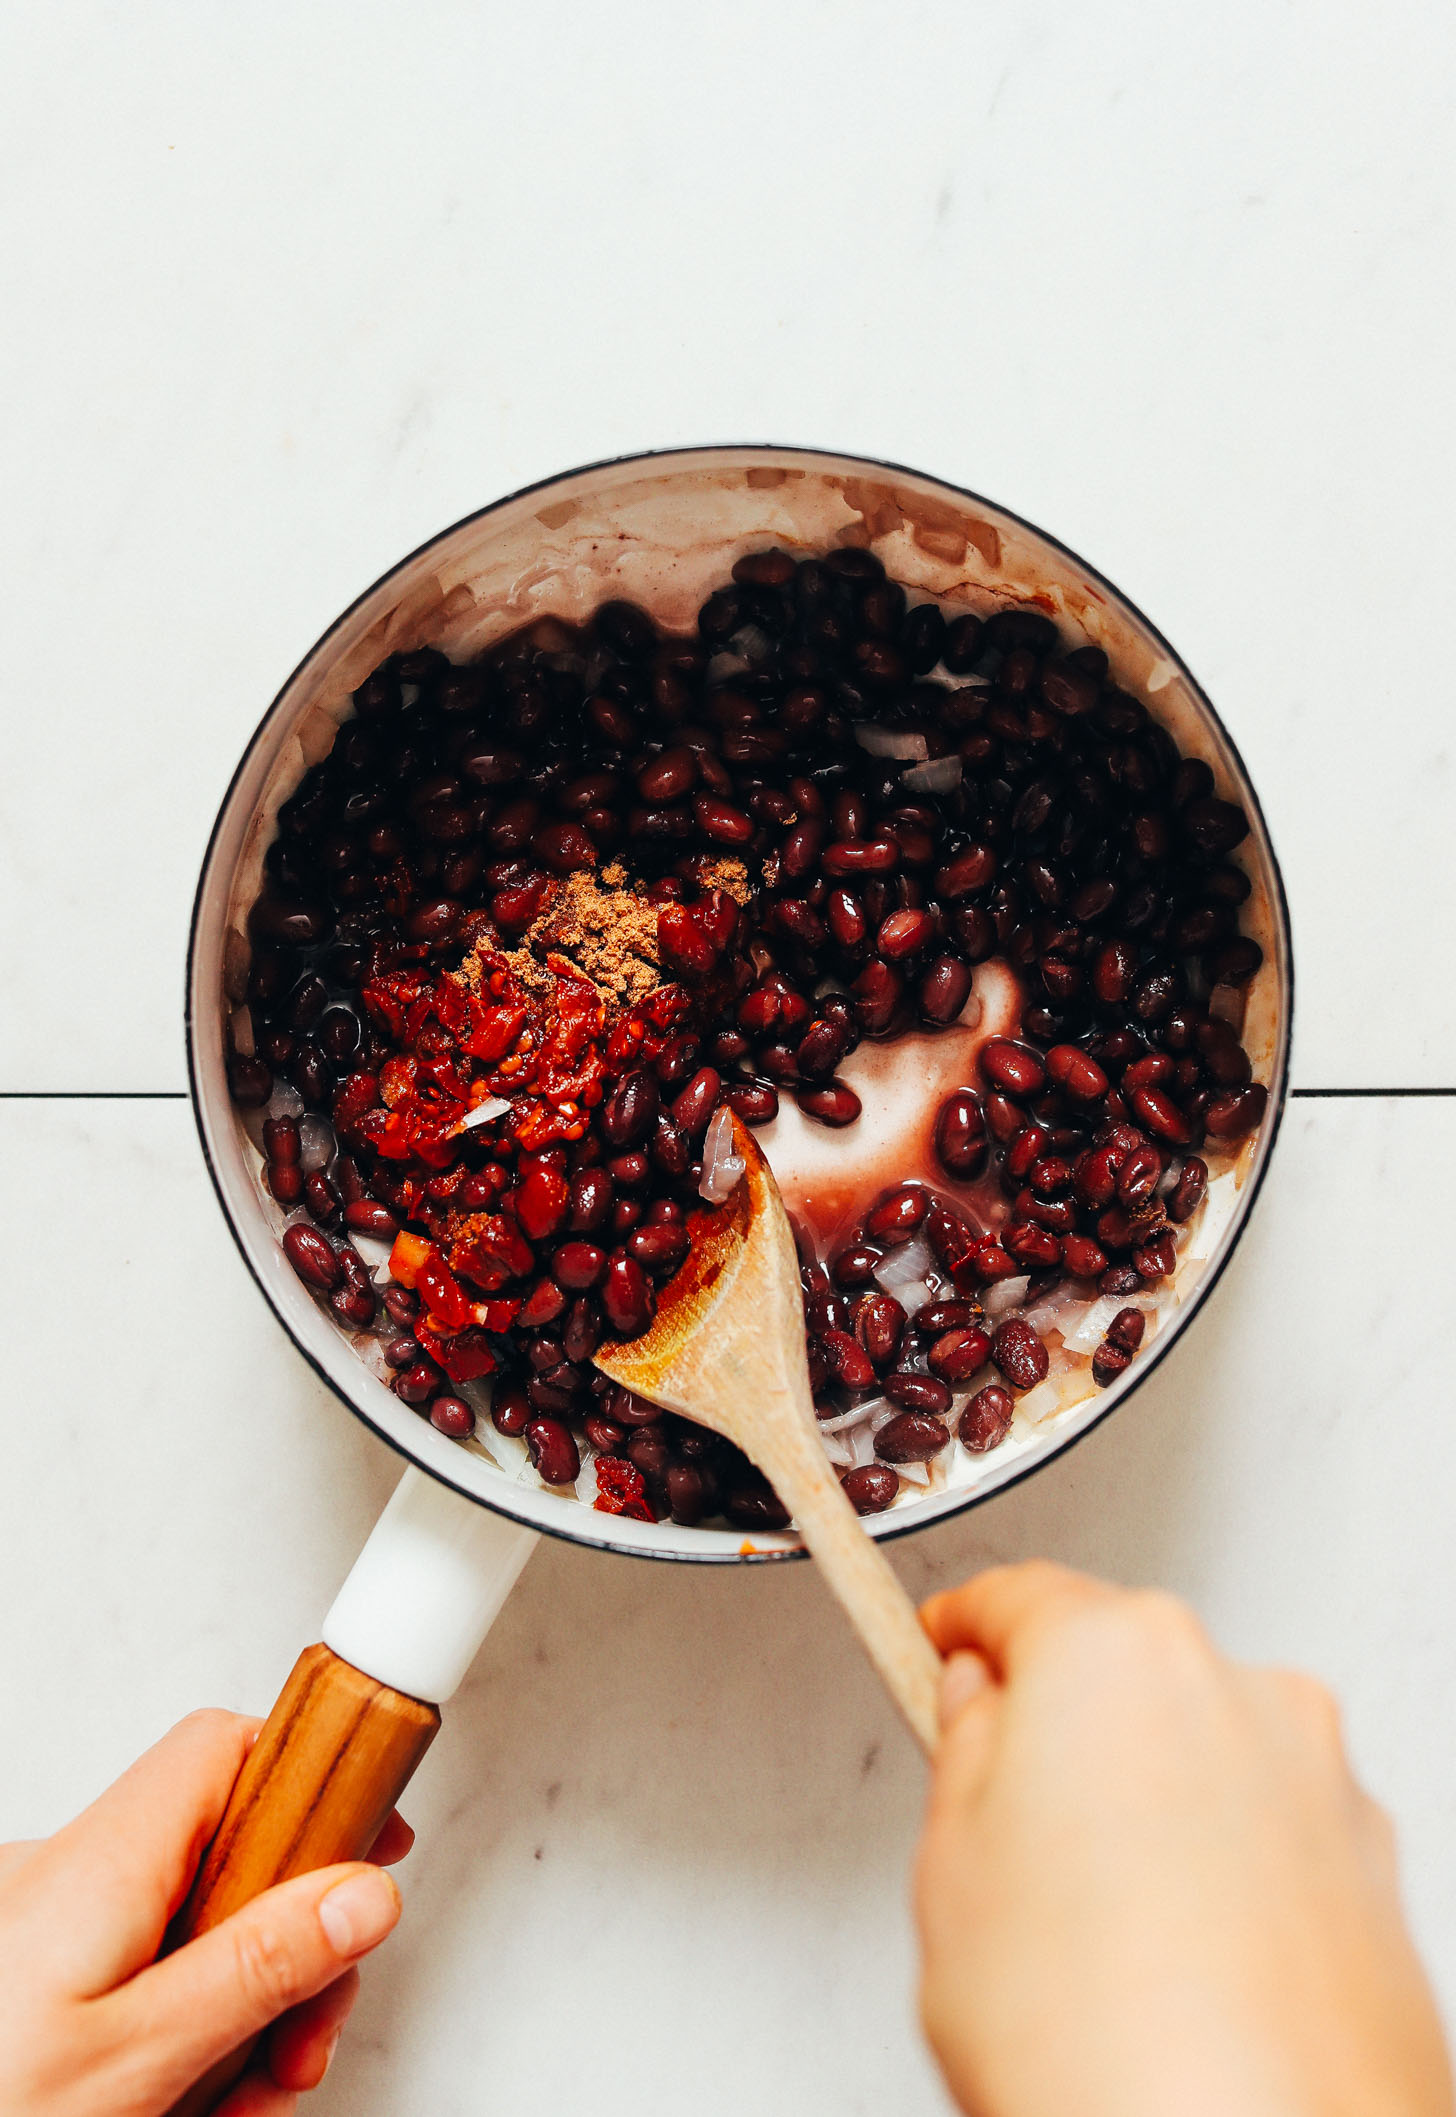 Using a wooden spoon to stir a saucepan of black beans, diced onion, and spices